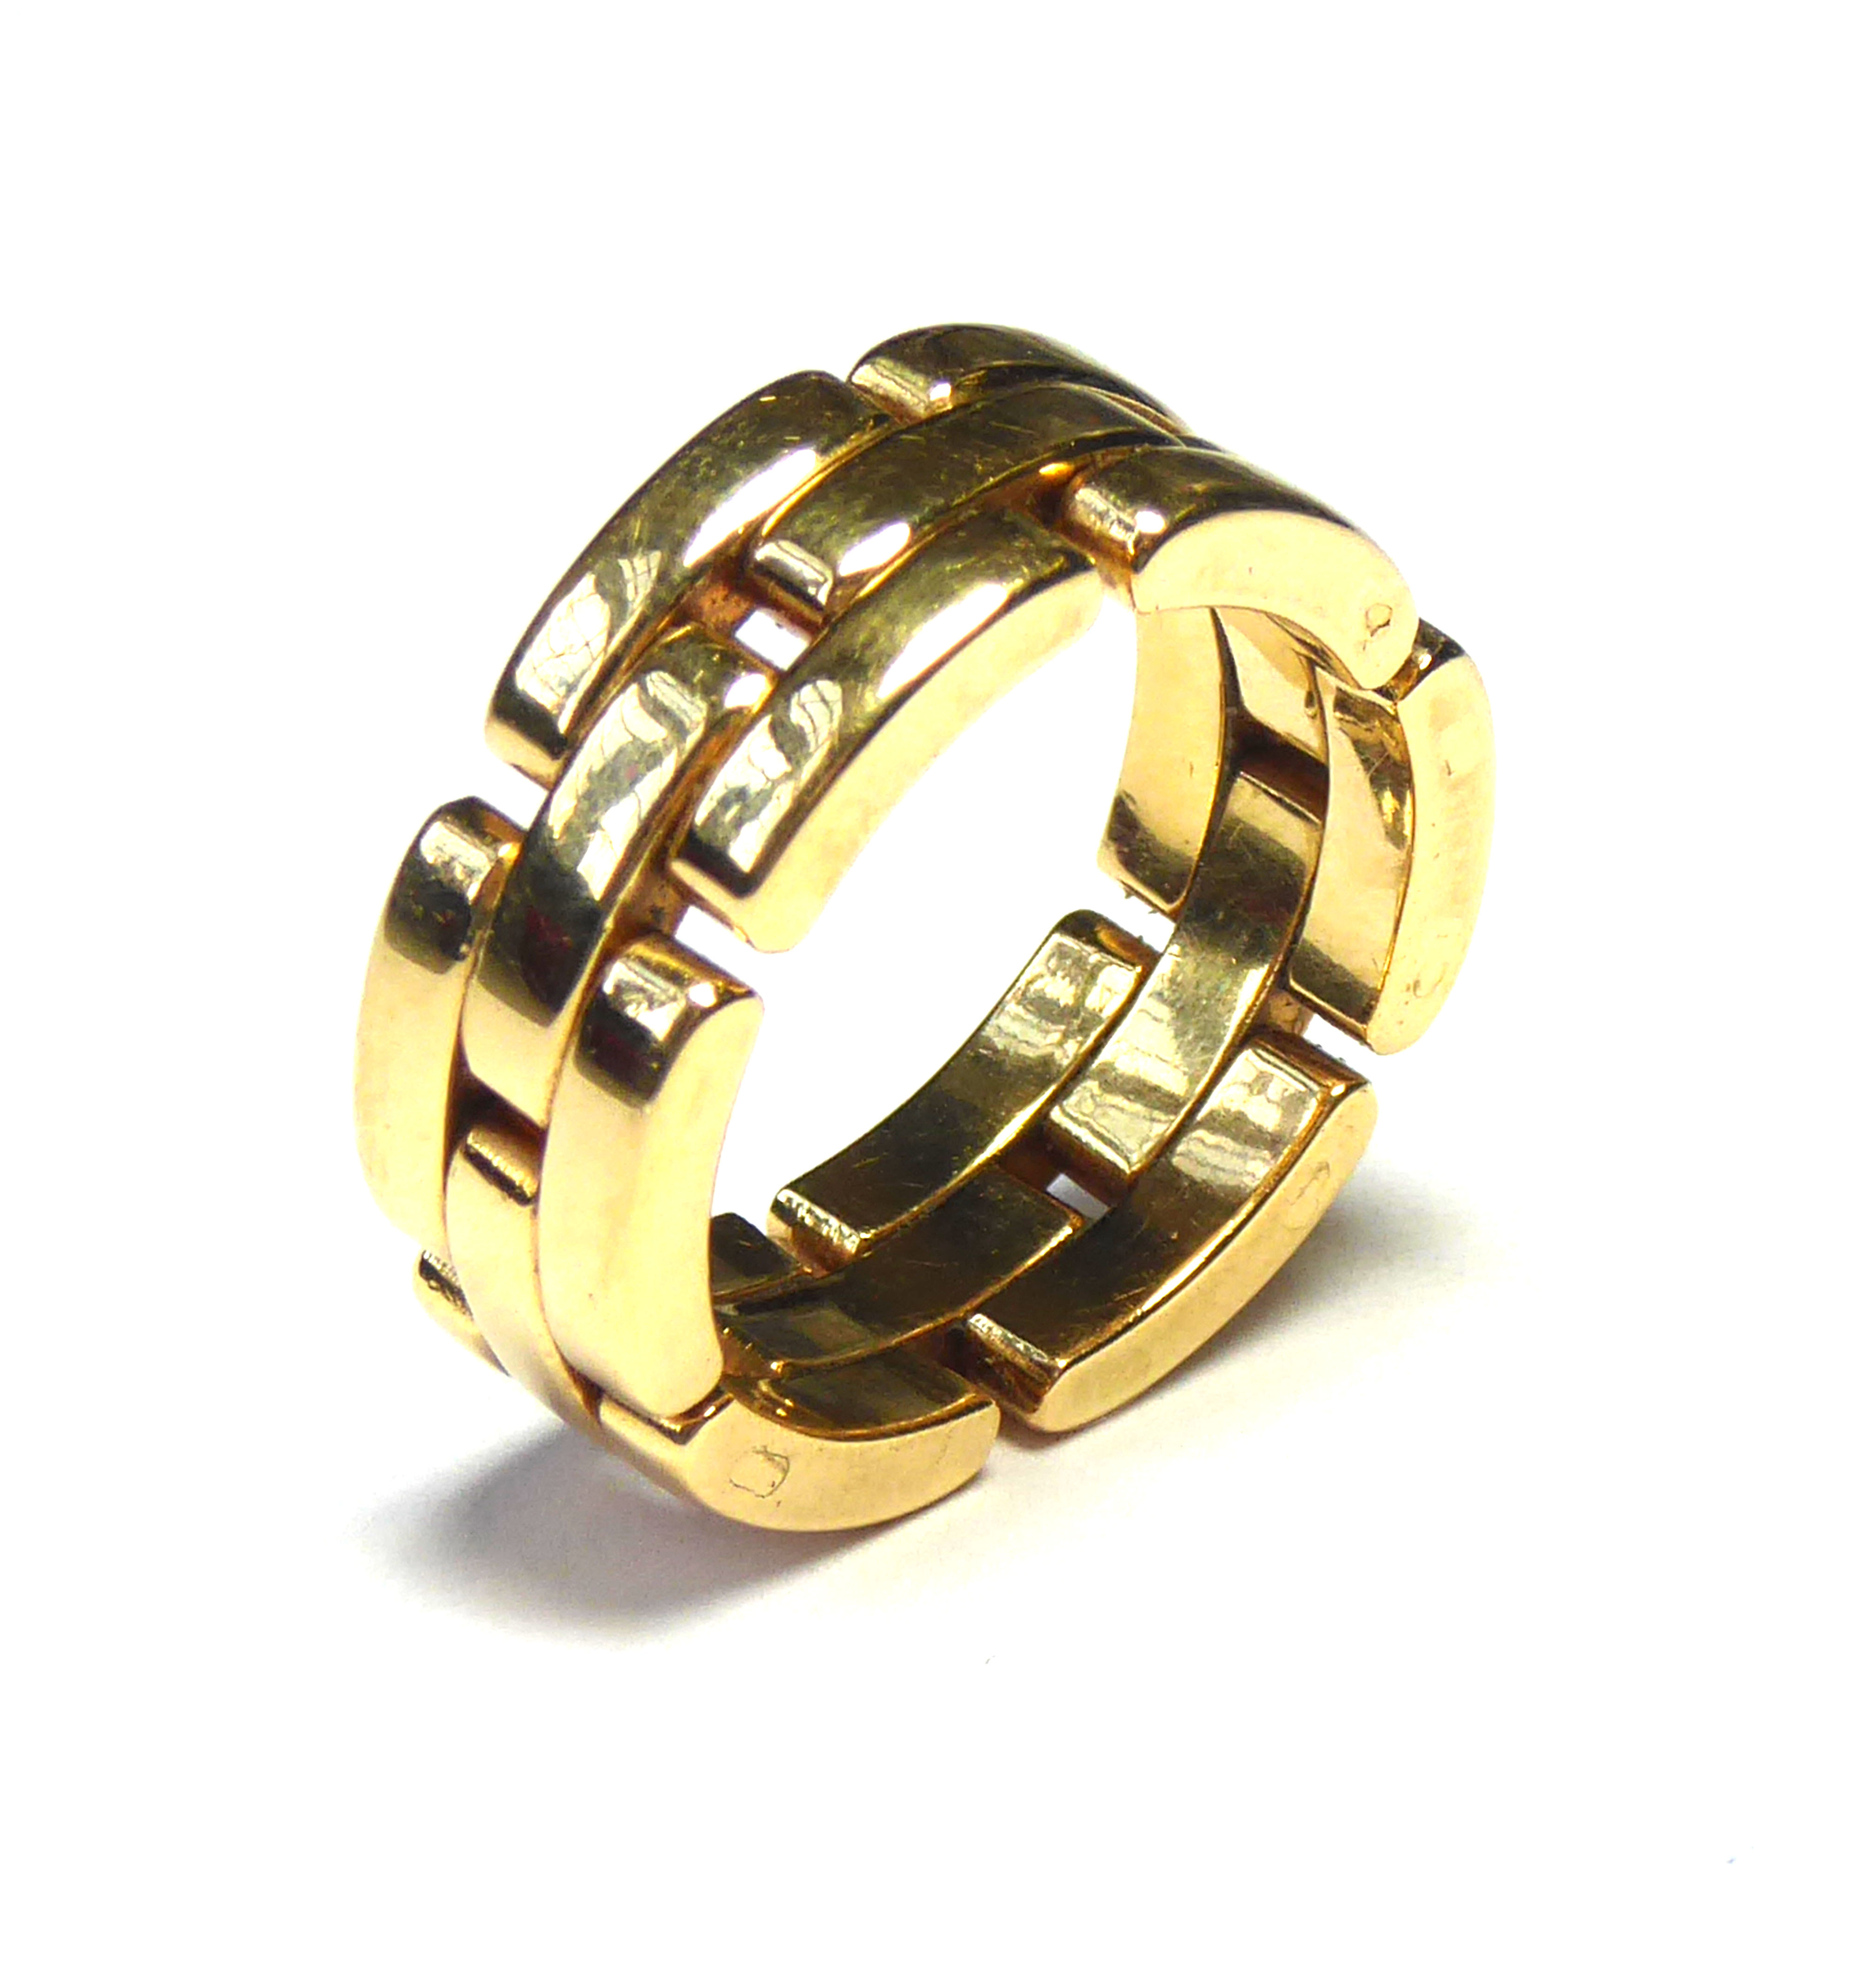 CARTIER, 'MAILLON PANTHÈRE', AN 18CT GOLD GEOMETRIC FORM WEDDING BAND Marked to outer edge (size M/ - Image 2 of 10